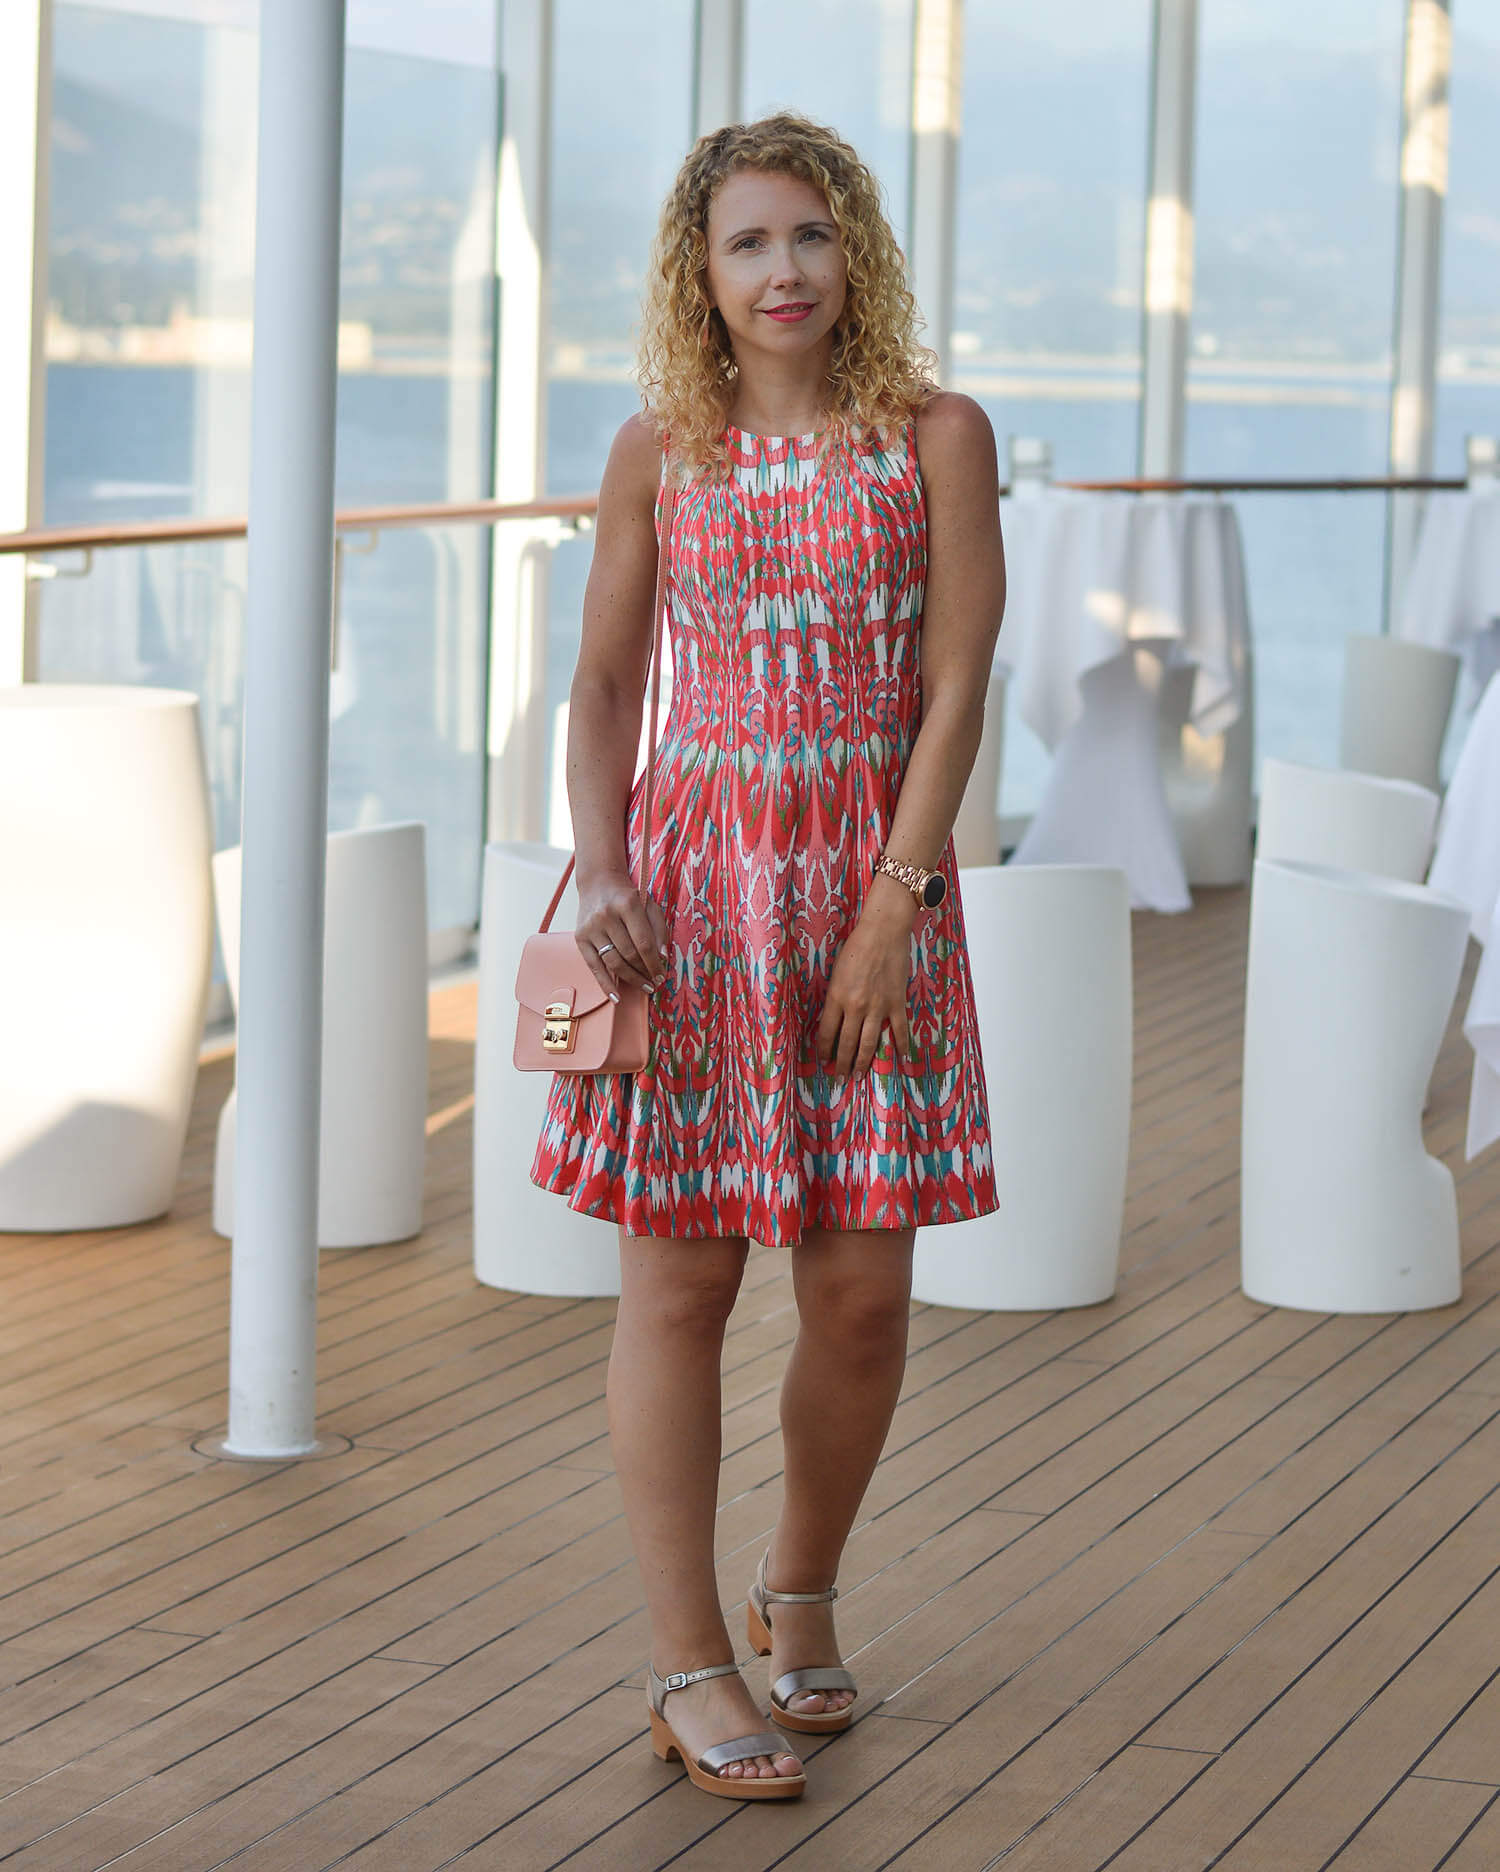 Outfit-Cocktail-Dress-Unisa-Sandals-and-Fula-Bag-on-Board-of-AIDAprima-Kationette-Fashionblogger